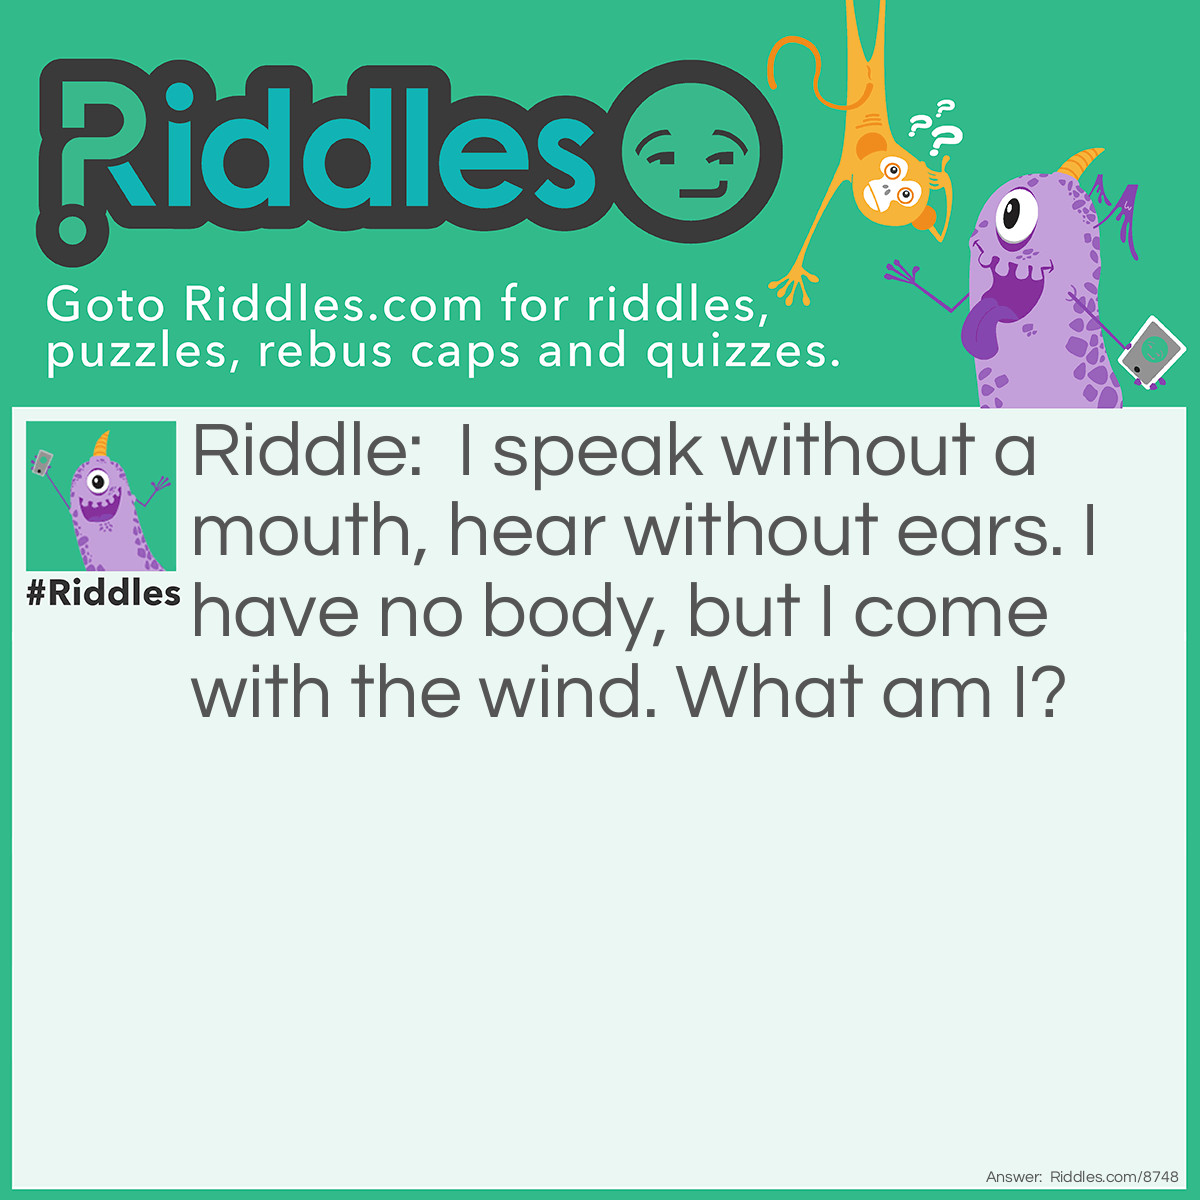 Riddle: I speak without a mouth, hear without ears. I have no body, but I come with the wind. What am I? Answer: An echo.